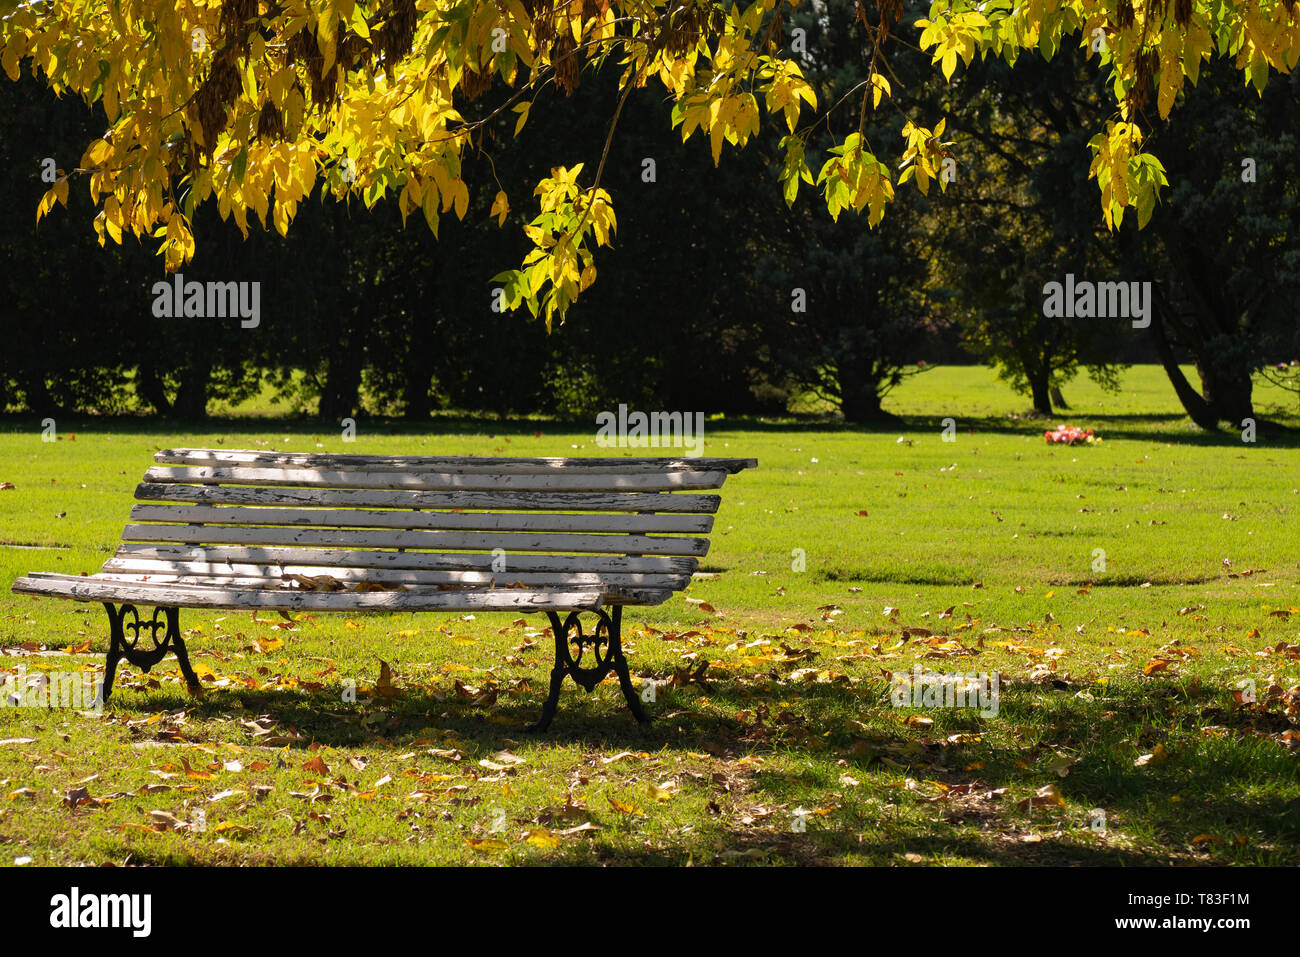 The colors and luminosity of autumn take over this rural image in the suburbs city of Buenos Aires, Argentina. Stock Photo